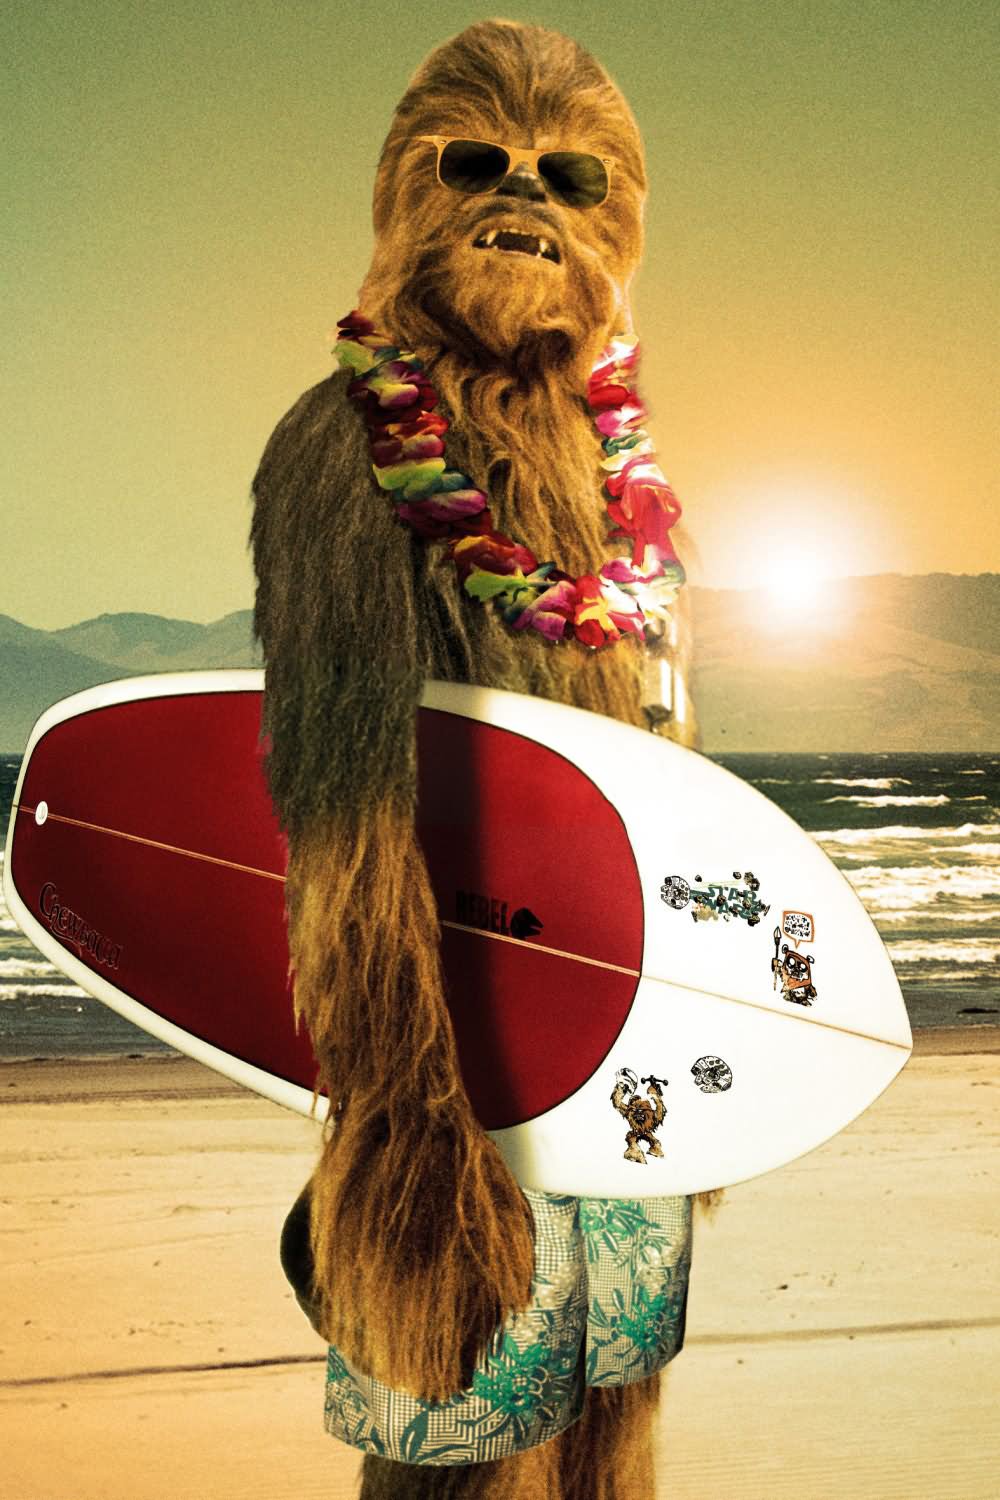 Chewbacca Funny Surf Image